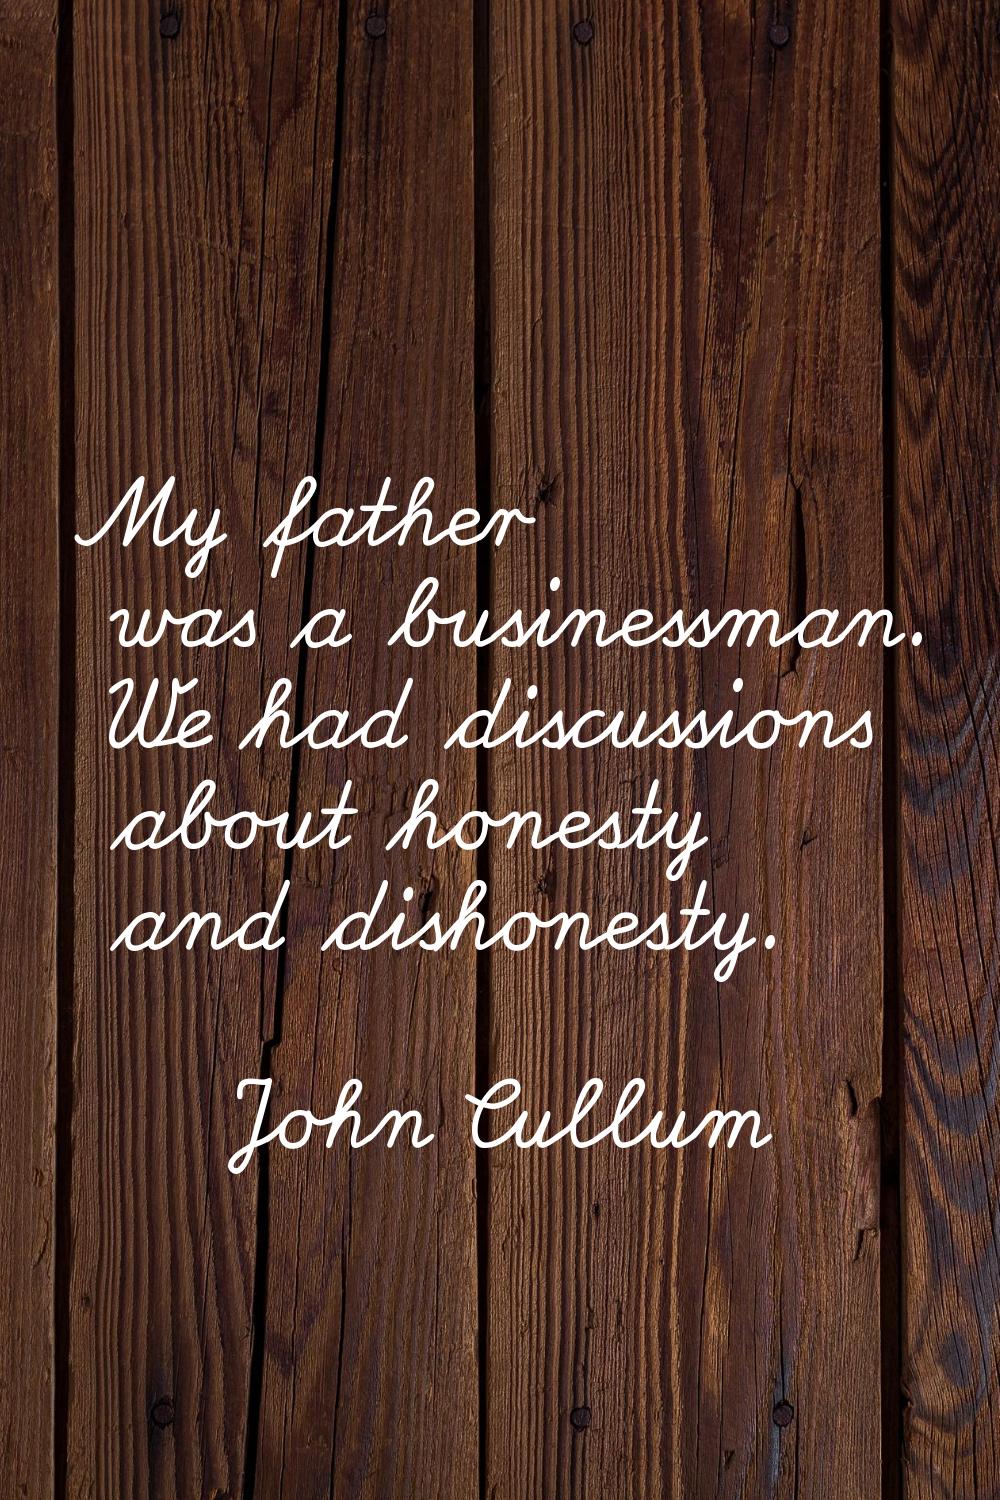 My father was a businessman. We had discussions about honesty and dishonesty.